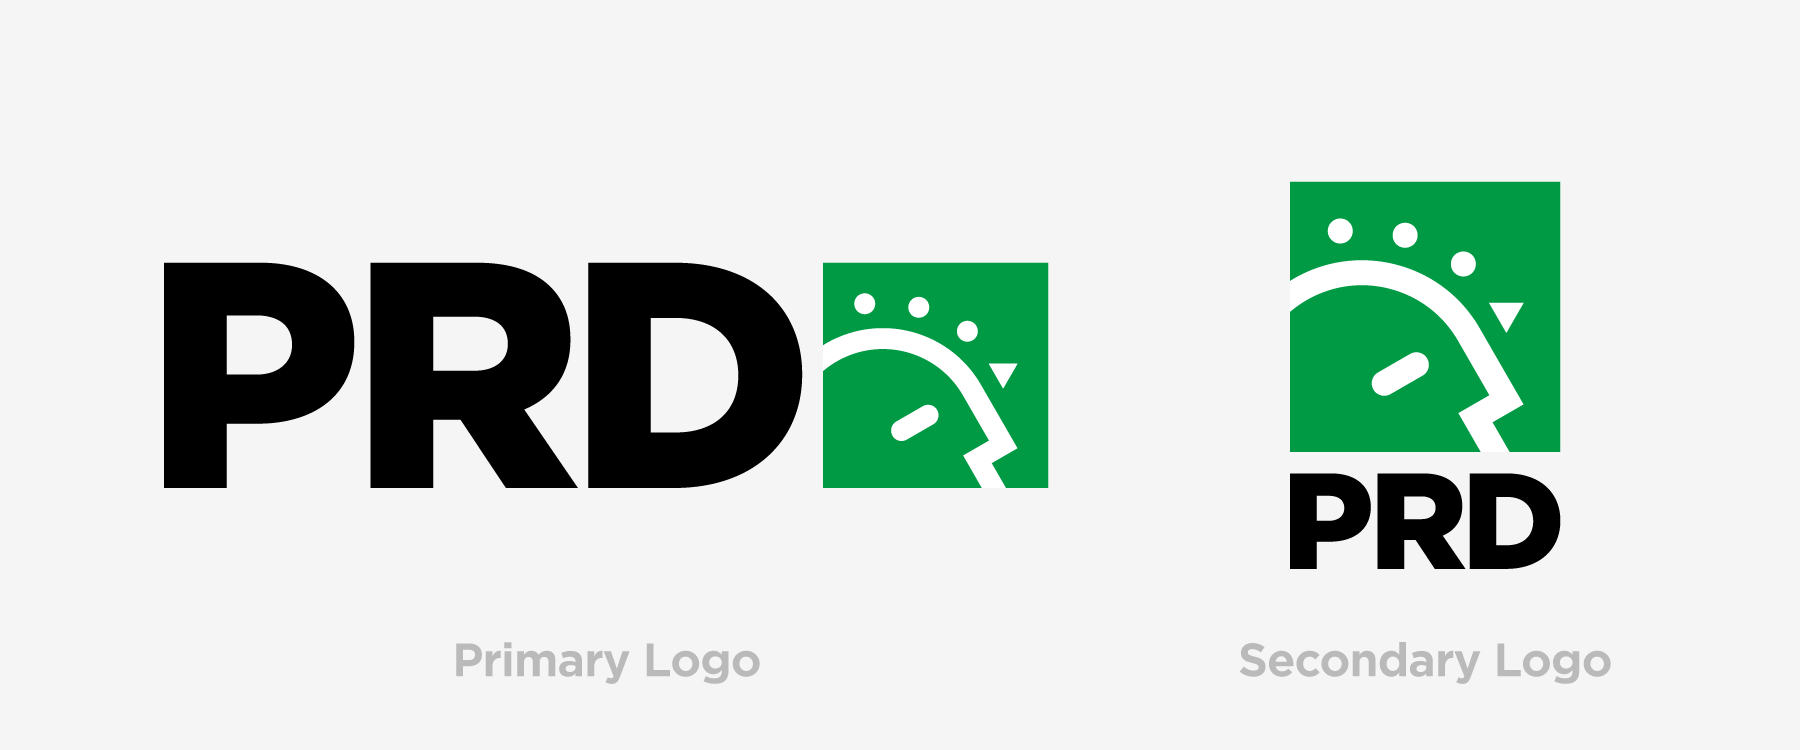 Primary and secondary PRD logos